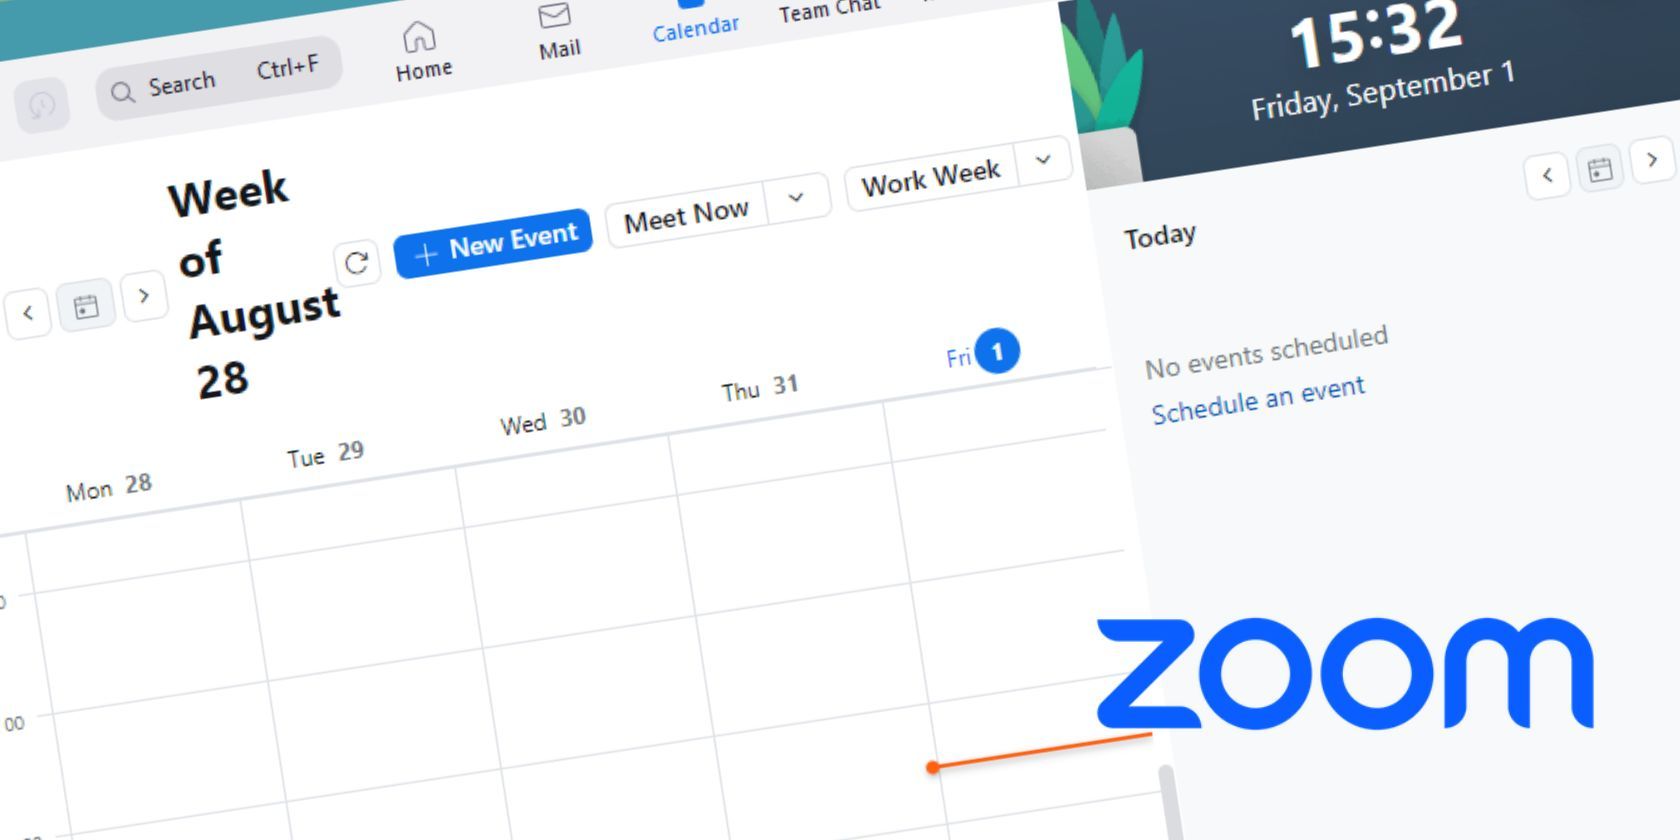 Zoom logo overlayed on the Calendar view of Zoom client